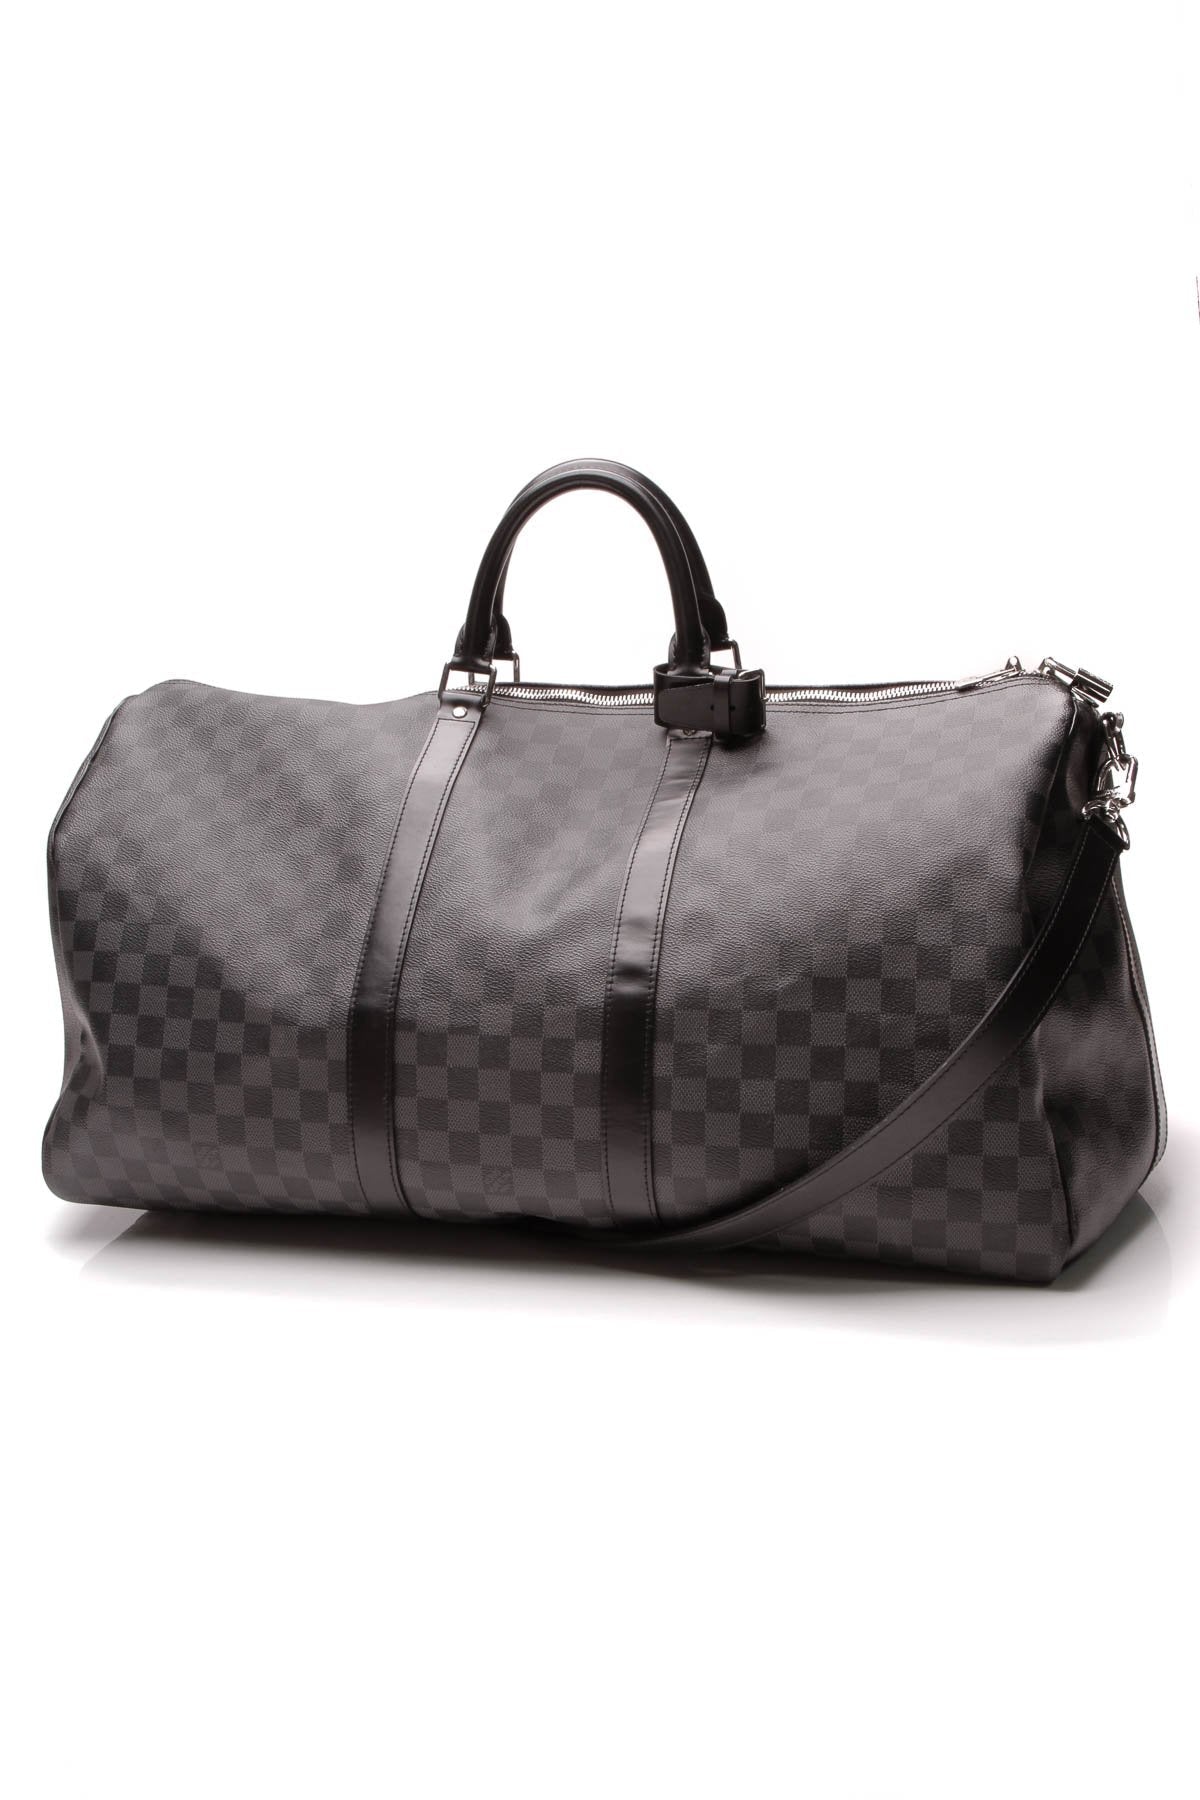 Keepall Bandouliere 55 Travel Bag - Damier Graphite